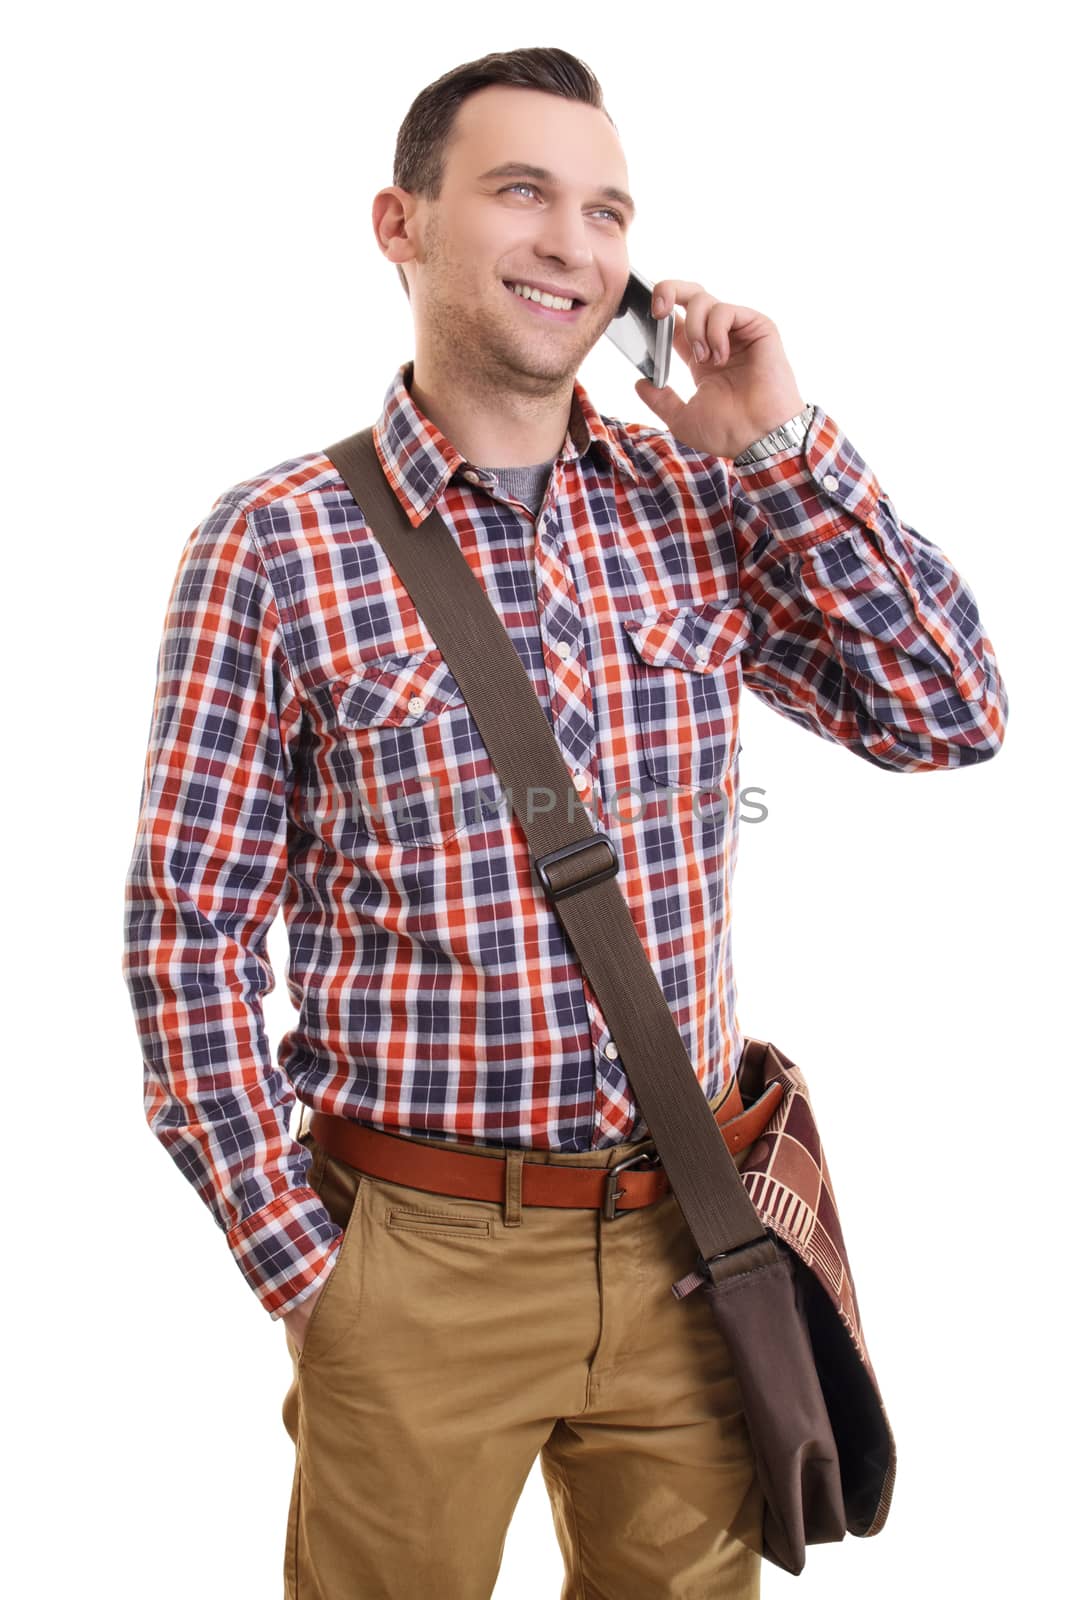 Handsome man in casual plaid shirt talking on mobile phone by Mendelex